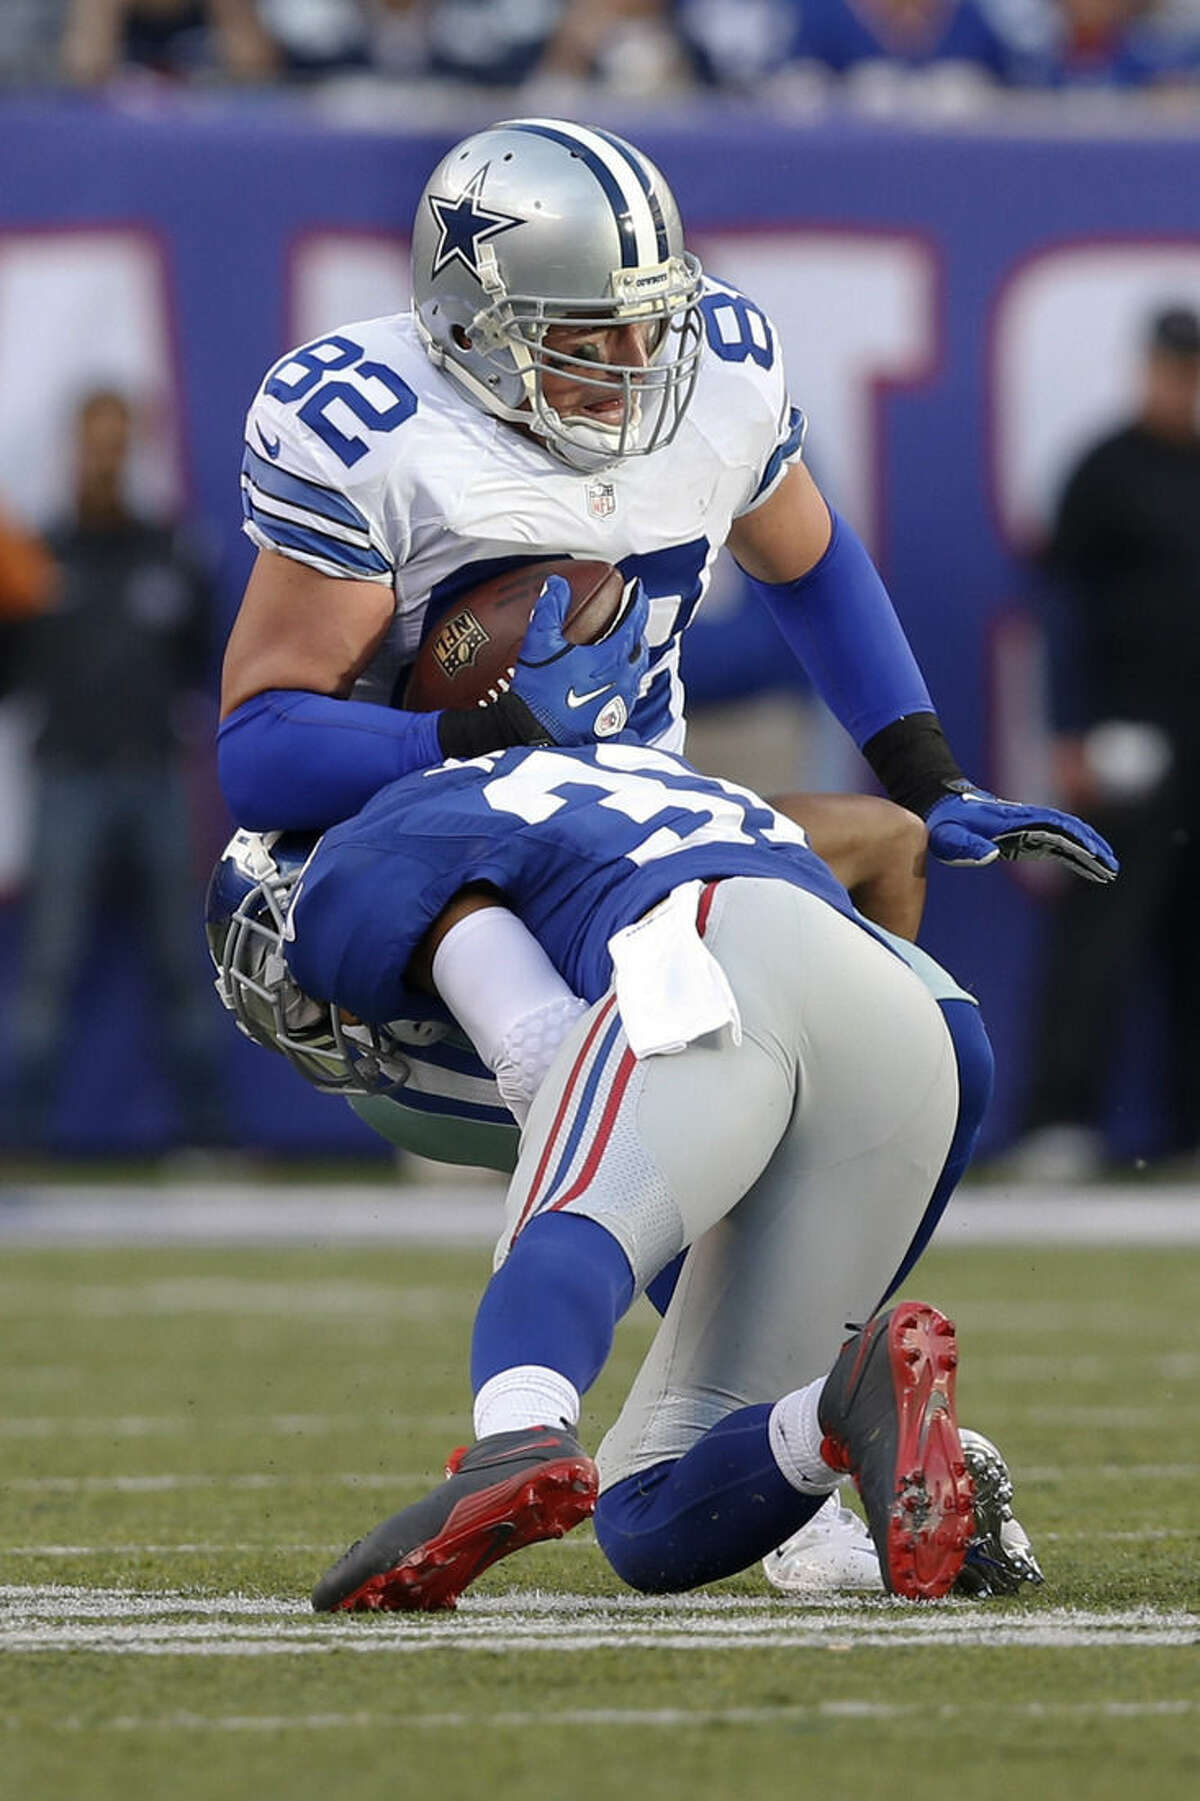 New York Giants' Trevin Wade (31) tackles Dallas Cowboys' Jason Witten (82) during the first half of an NFL football game Sunday, Oct. 25, 2015, in East Rutherford, N.J. (AP Photo/Kathy Willens)